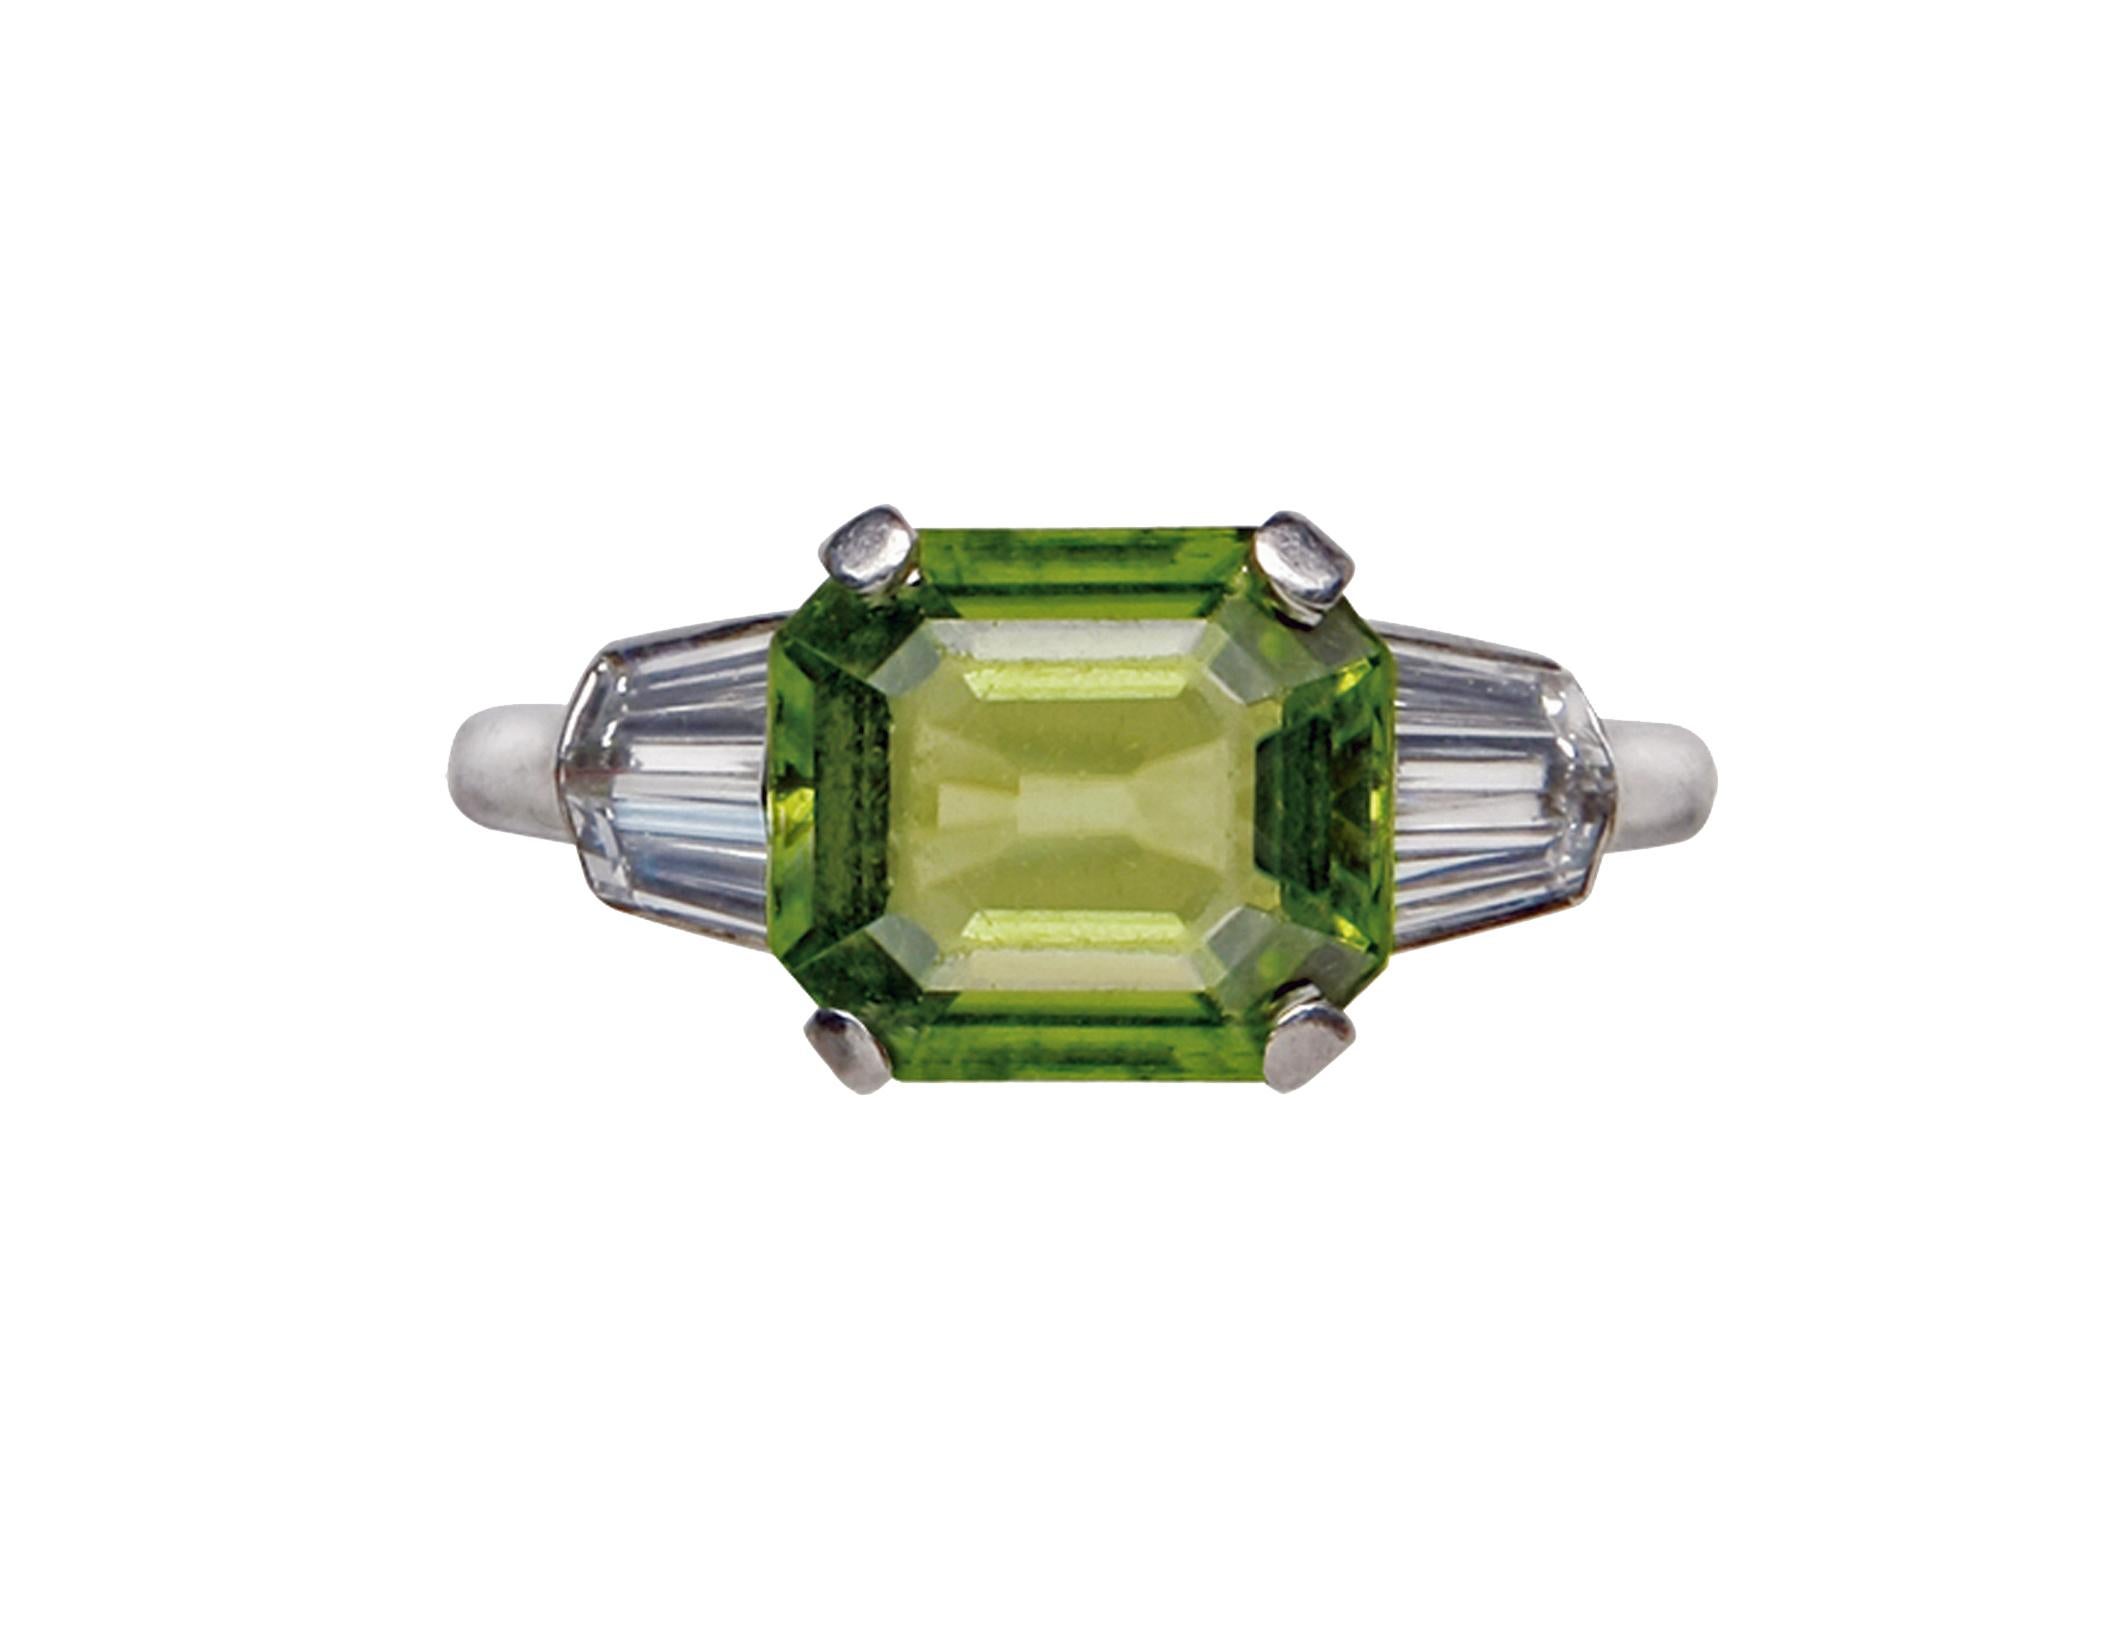 Art Deco Platinum Peridot Diamond Ring, C.1920. The Ring set with an emerald cut Peridot, gauging 9.40 x 8.30 x 4.65 mm, approximately 3.00 cts, flanked on either side with three tapered baguette cut diamonds, total diamond weight approximately 0.90